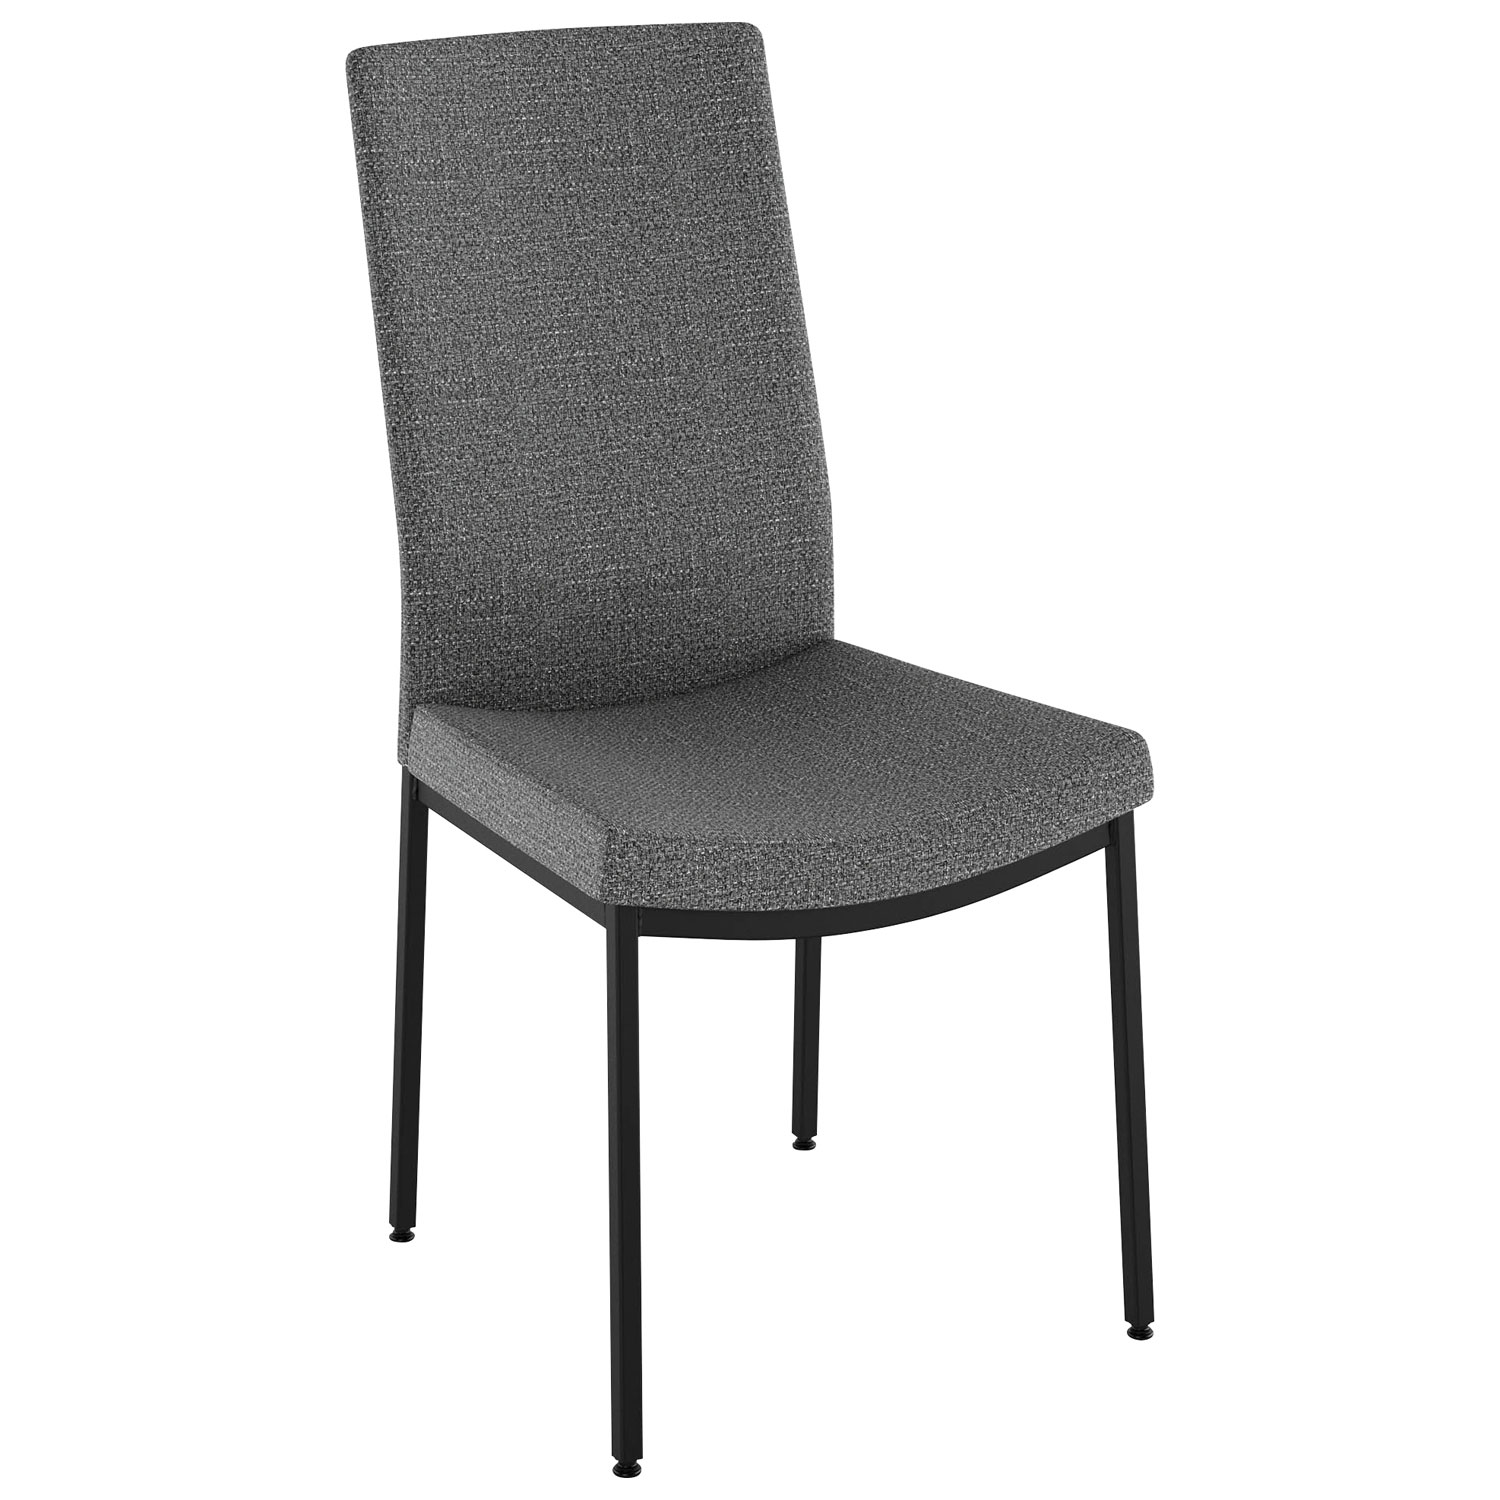 Torres Contemporary Fabric Dining Chair - Grey Woven/Black